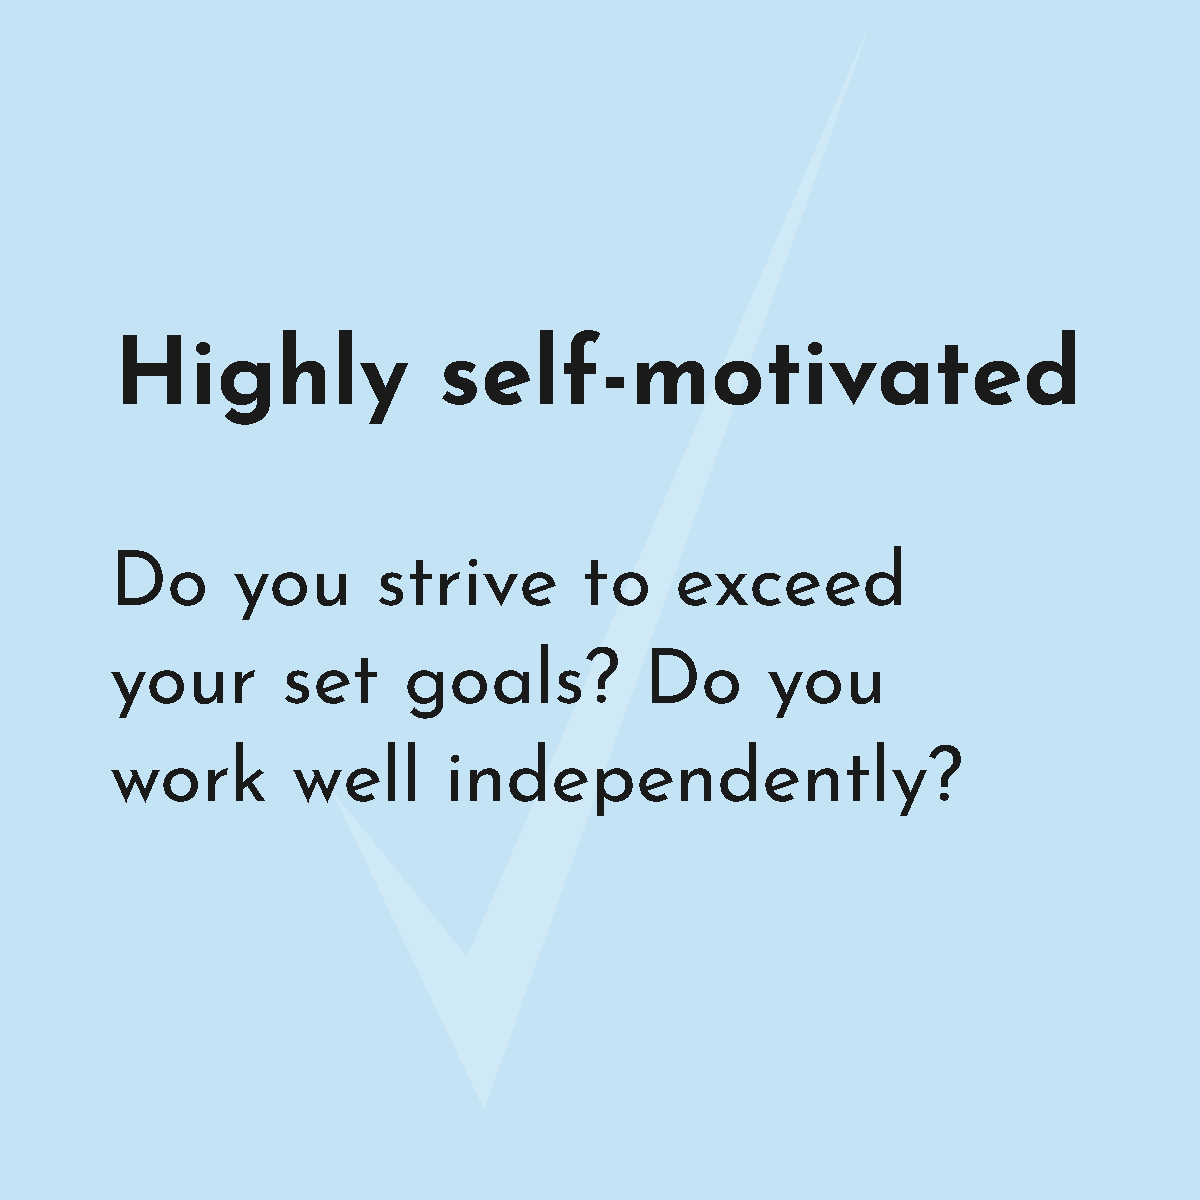 highly self-motivated